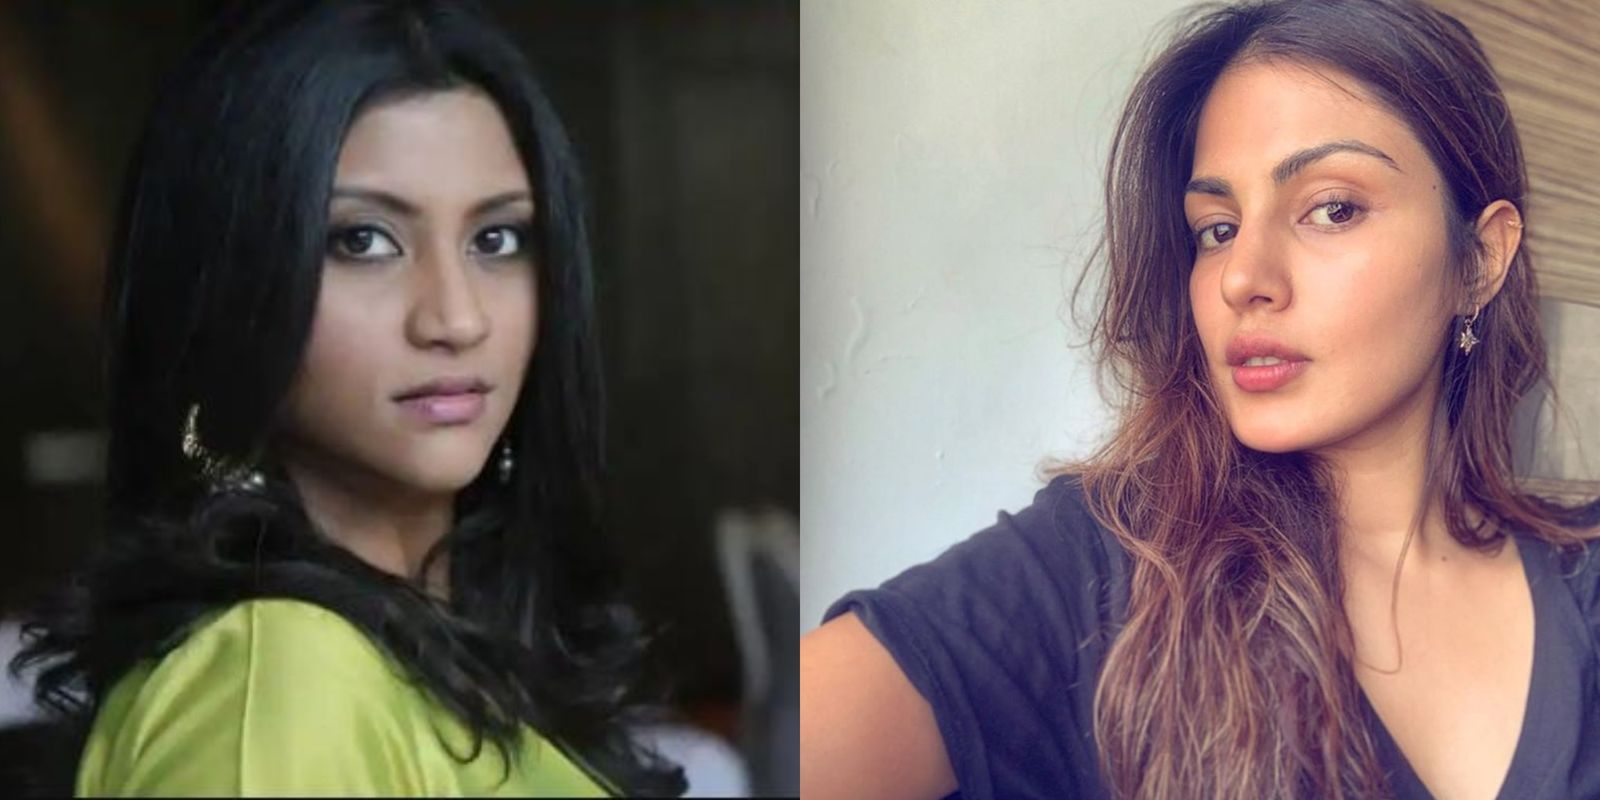 Konkona Sen Sharma Appalled At The  Media 'Covering' Rhea Chakraborty, When There Is Not Dearth Of Serious Issues 